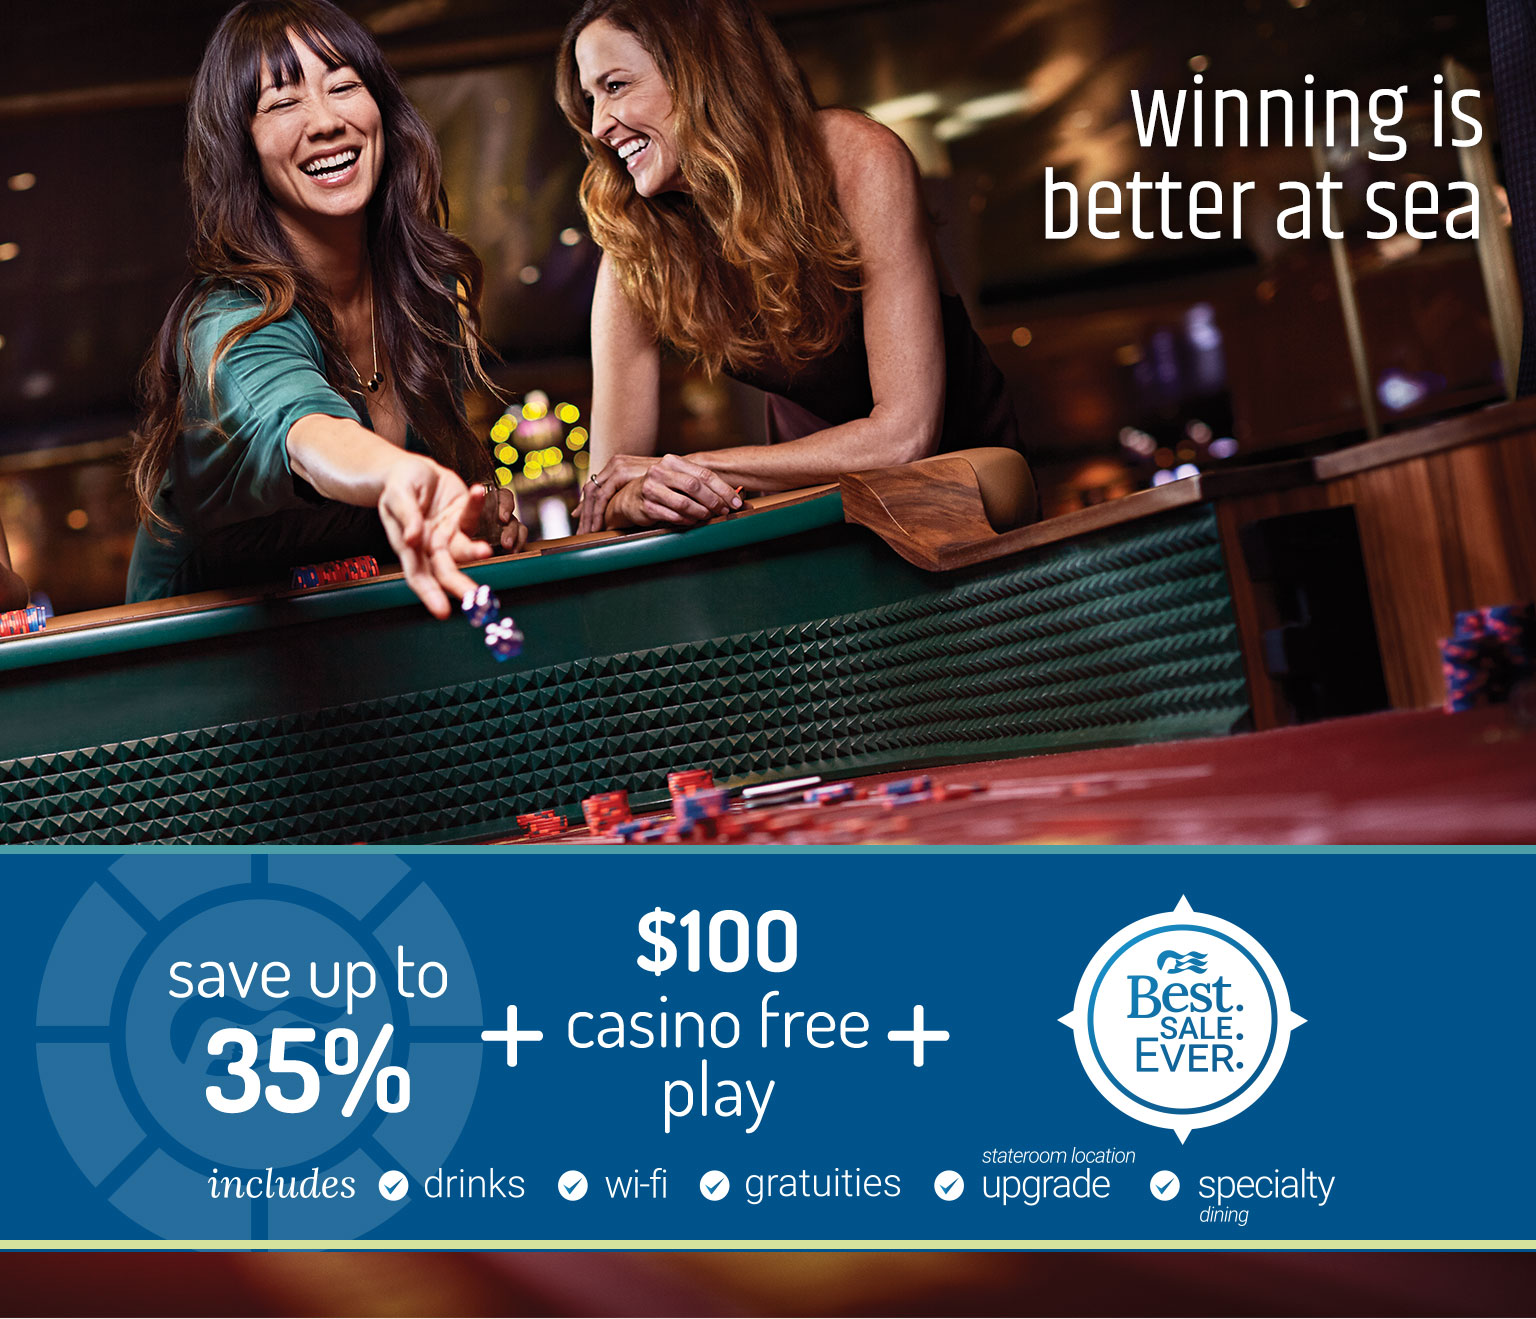 Winning is better at sea - Save up to 35% + $100 casino free play + Best. Sale. Ever.